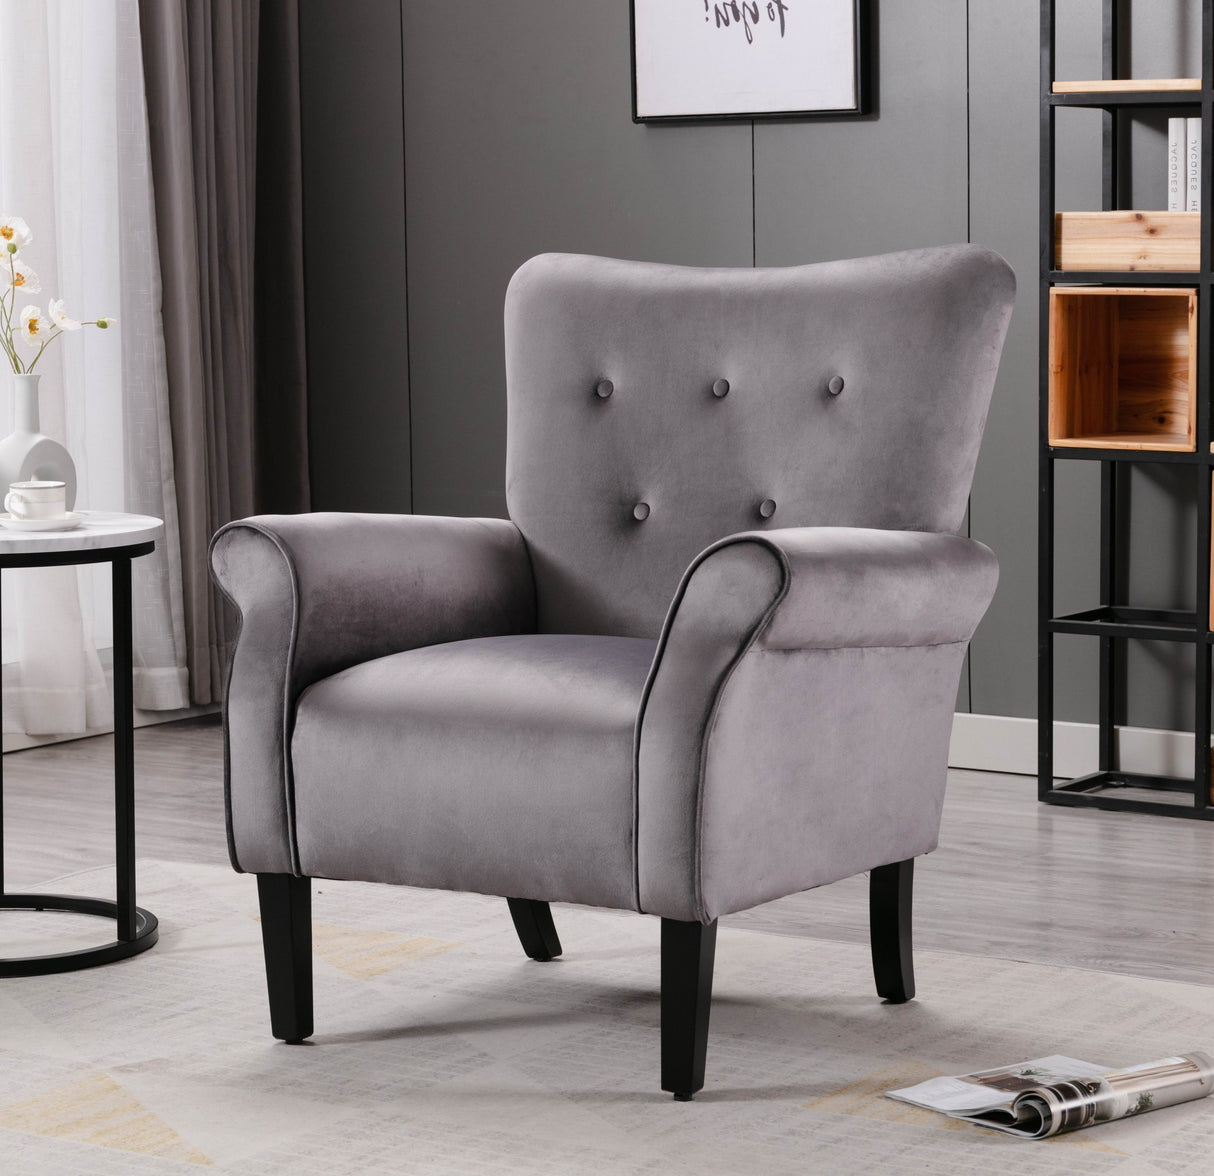 Stylish Living Room Furniture 1pc Accent Chair Grey Button-Tufted Back Rolled-Arms Black Legs Modern Design Furniture